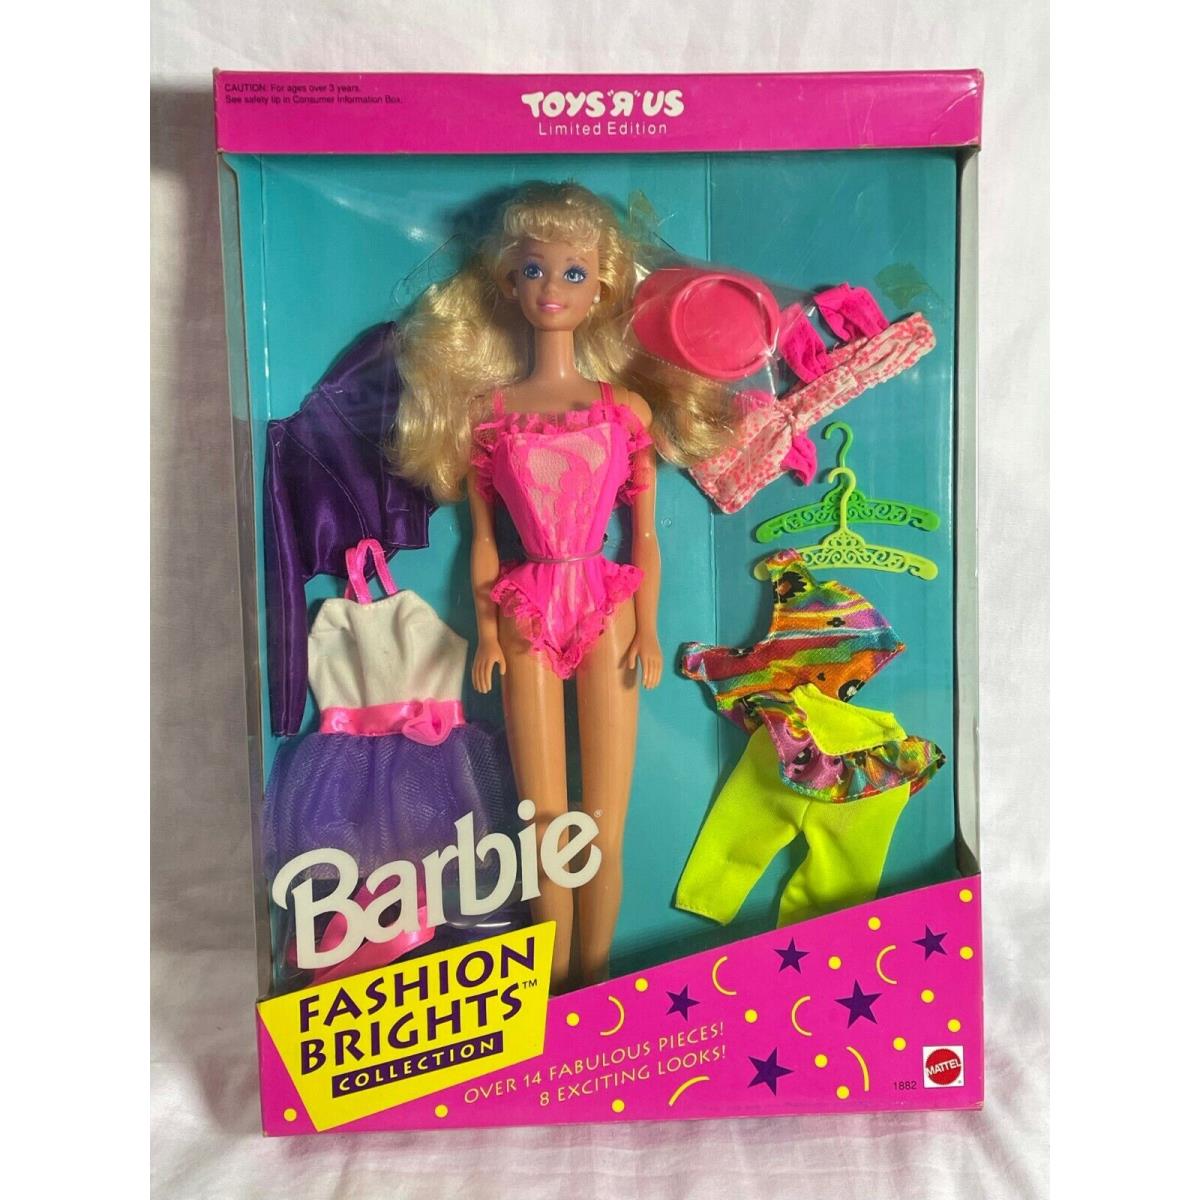 Vintage Mattel Fashion Brights Collection Barbie Toys R Us Limited Edition 1992